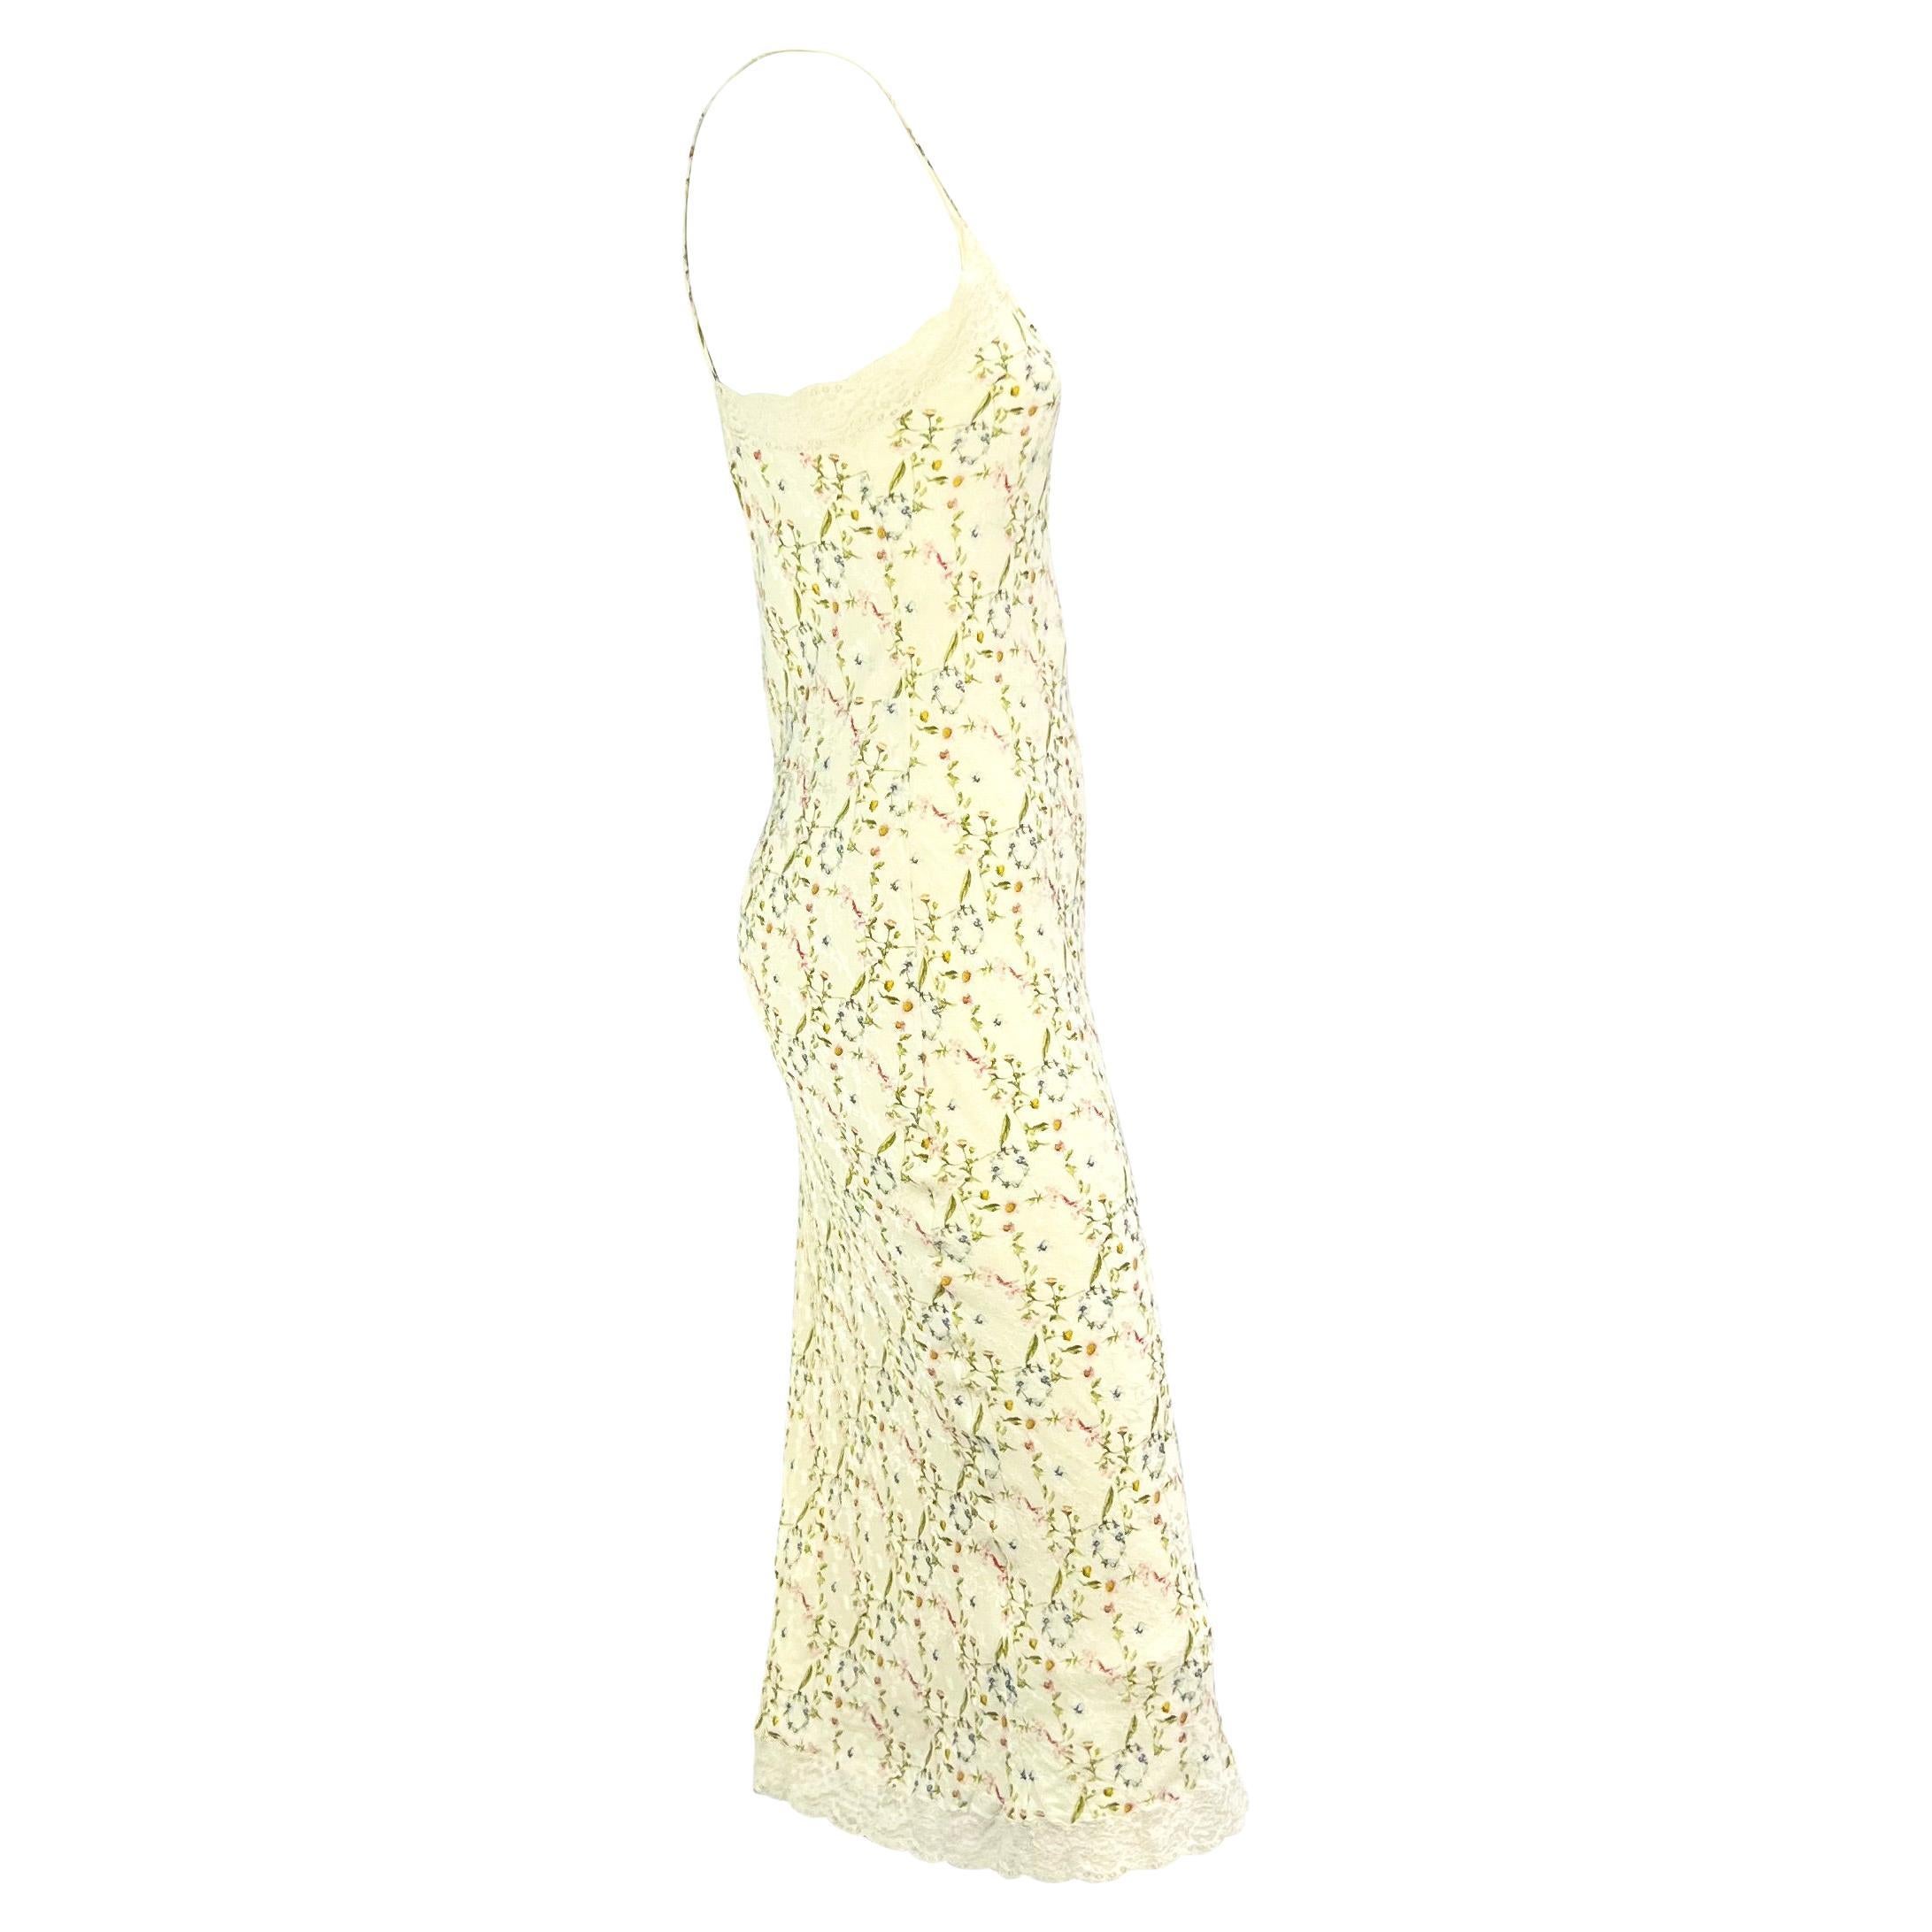 S/S 2005 Christian Dior by John Galliano Floral Diorissimo Lace Slip Dress 2